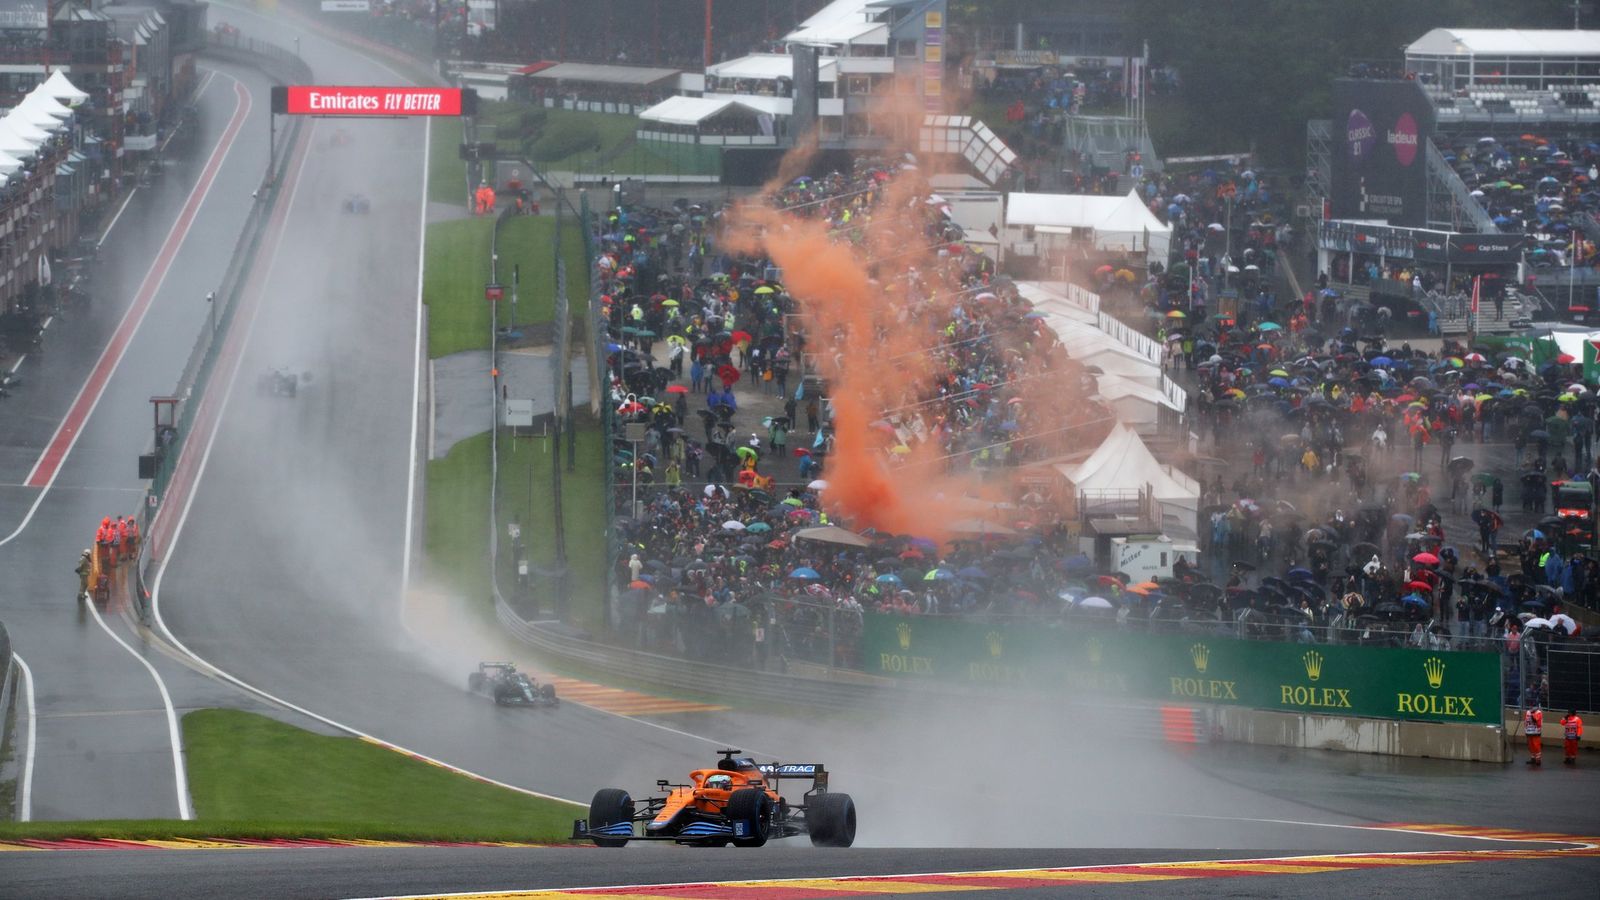 F1's potential ousting of Spa forces Belgian government to step in